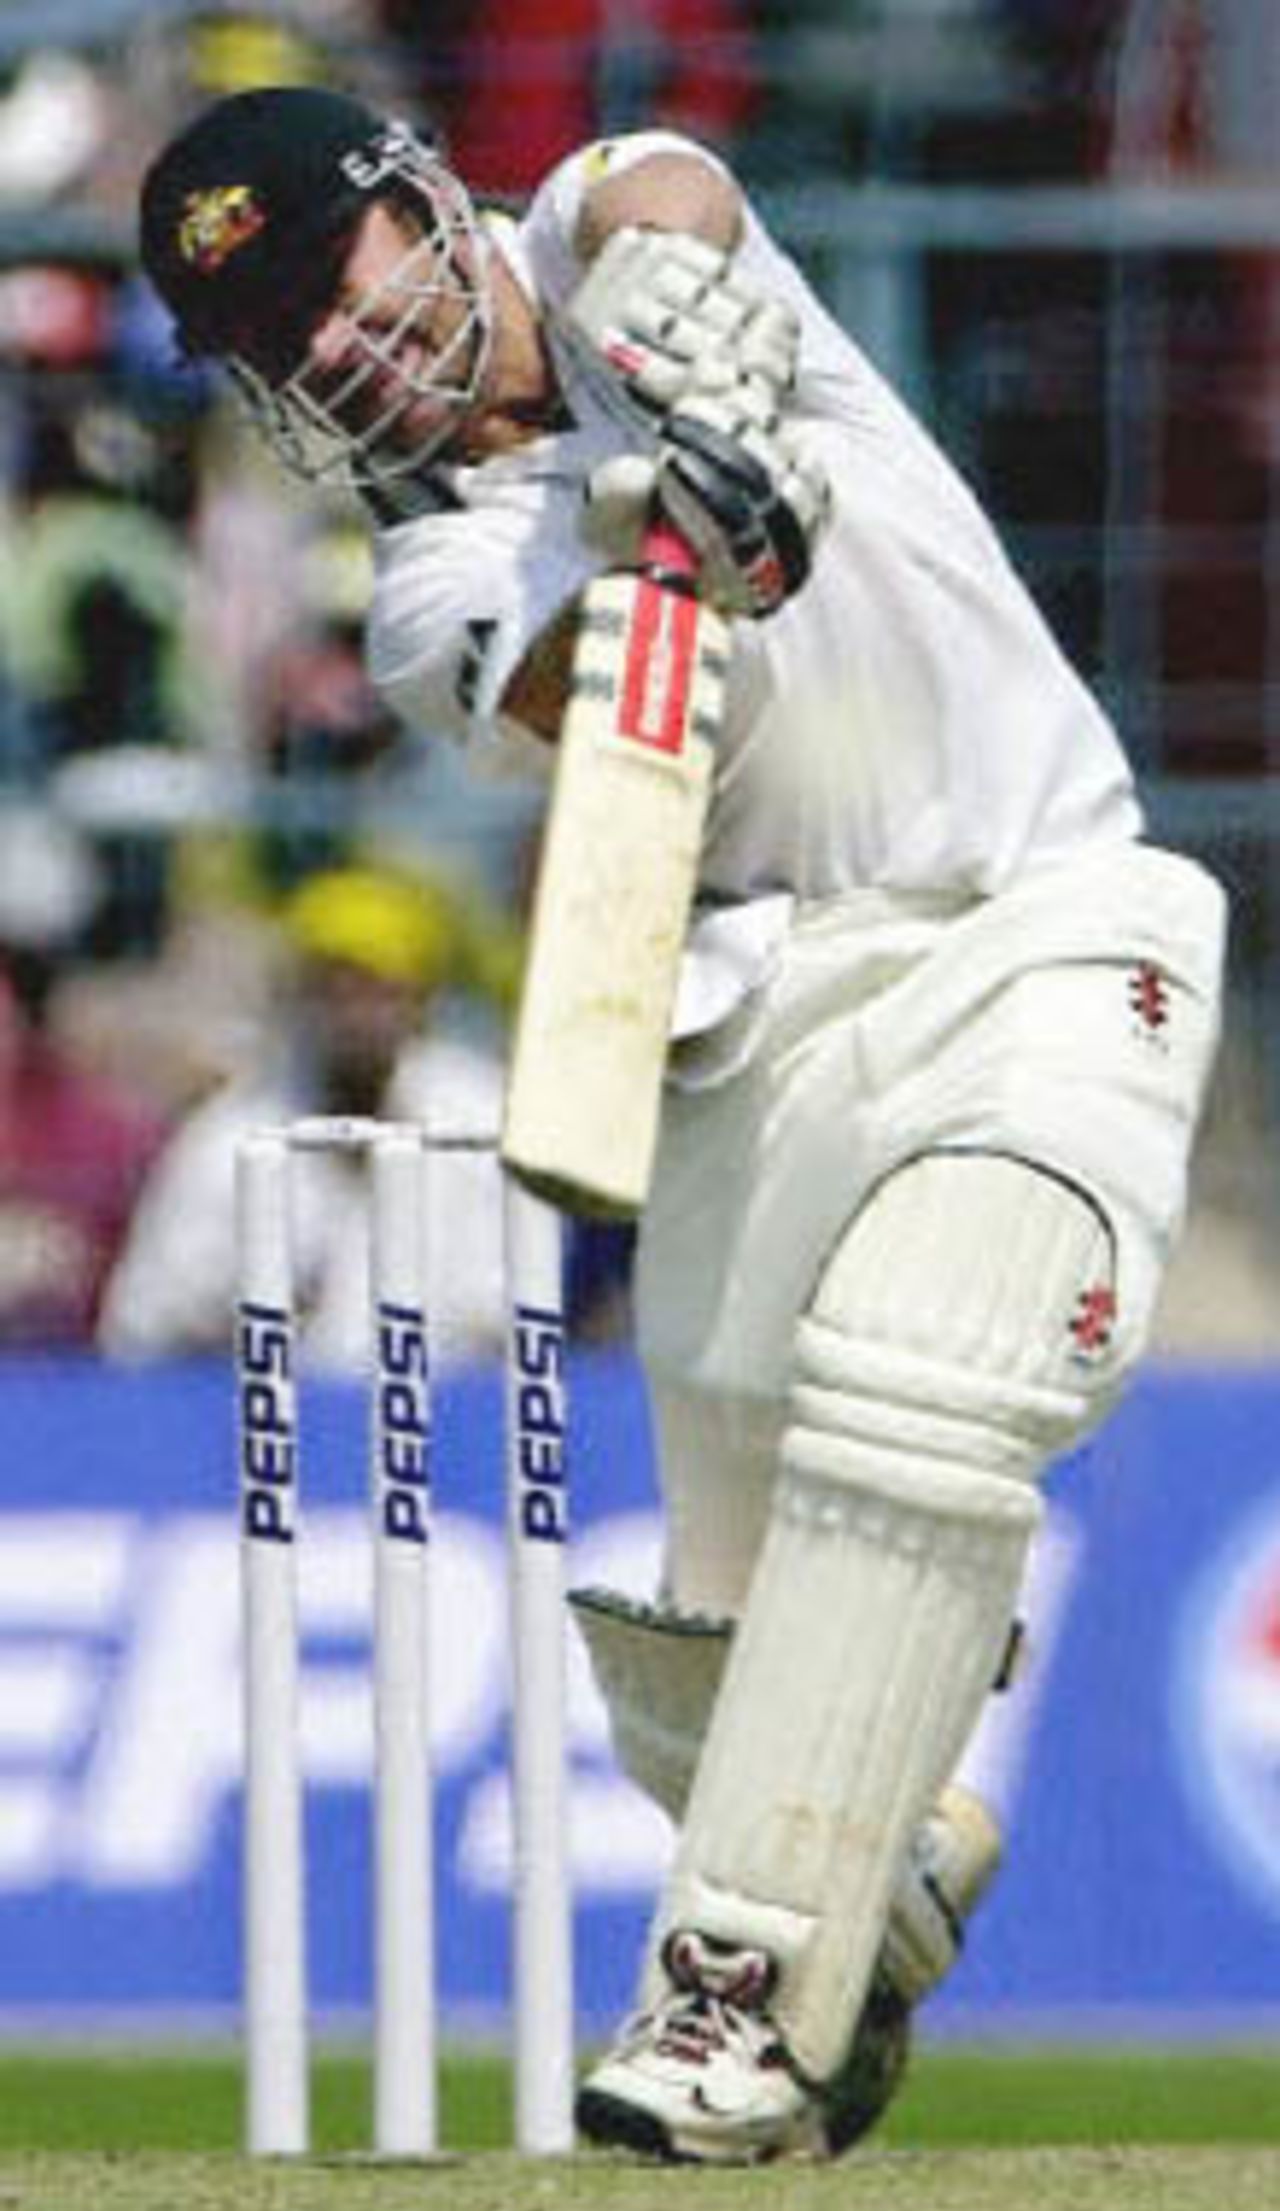 11 Mar 2001: Australian opening batsman Michael Slater drives a delivery from India's pace bowler Zaheer Khan to the boundary on his way to scoring an unbeaten 41 runs before lunch on the first day of the second Test at Kolkata.